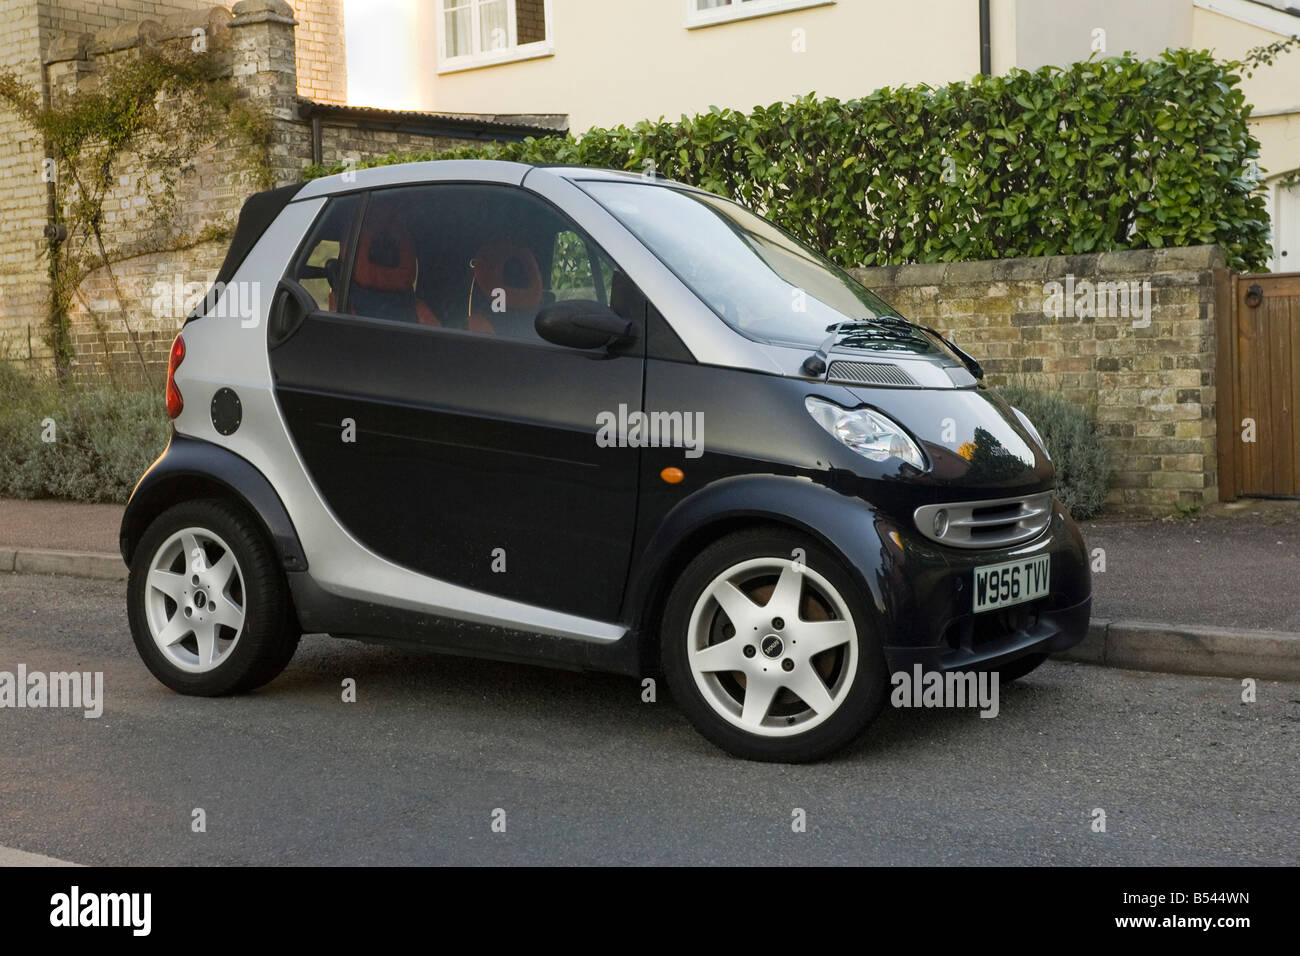 Smart Fortwo car in UK Stock Photo